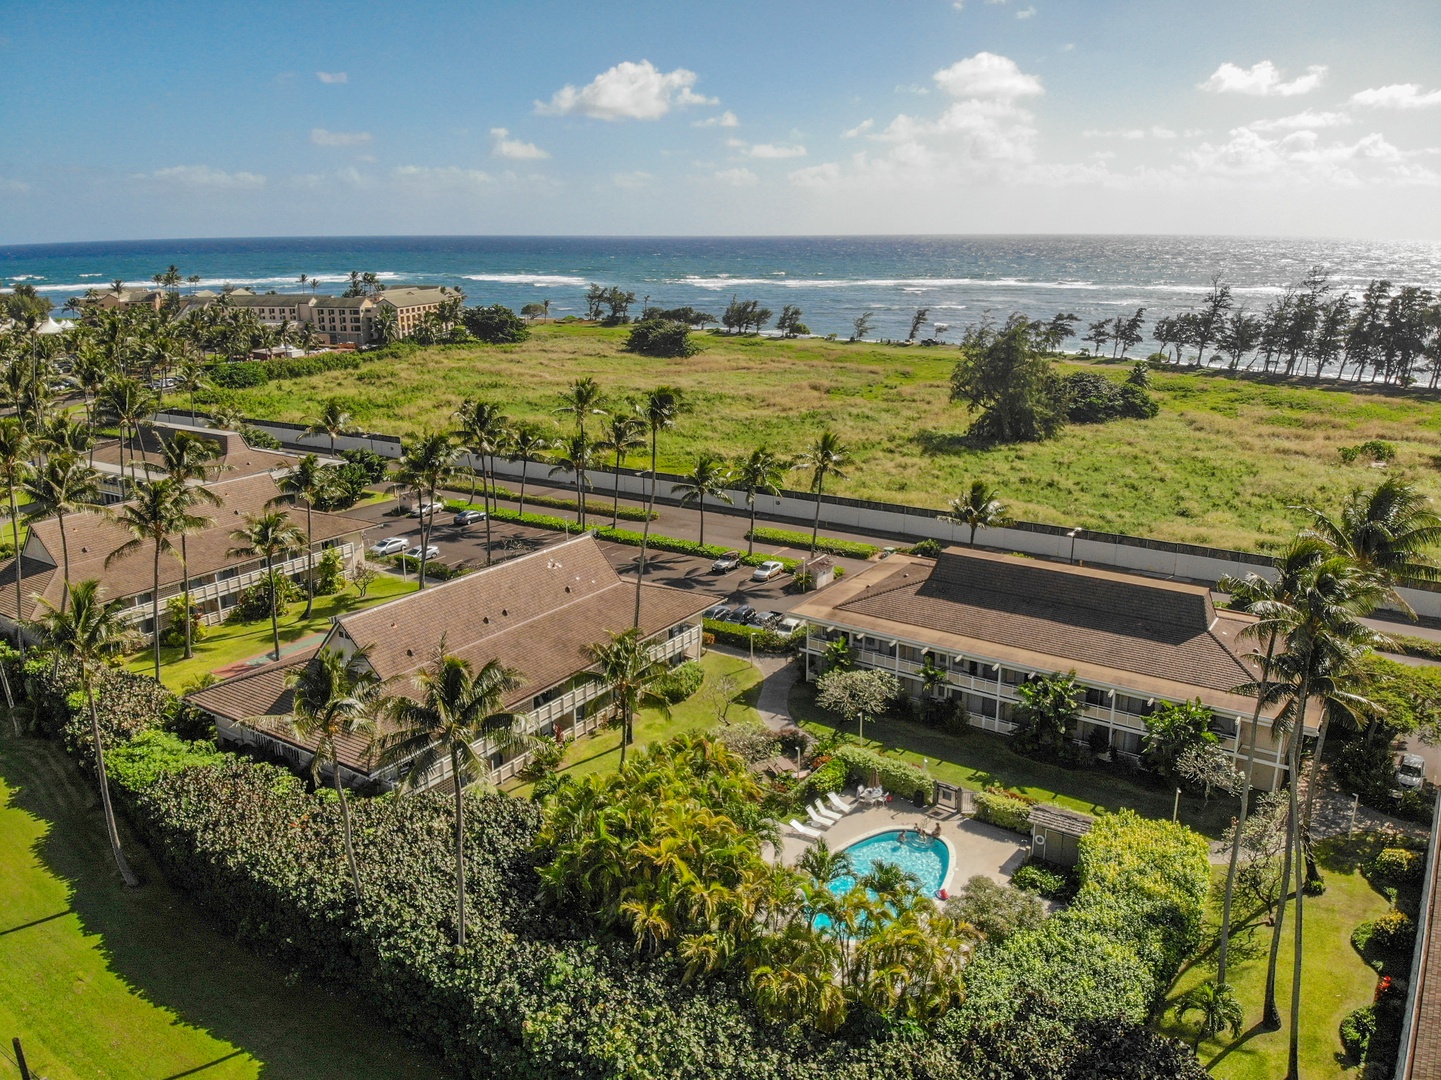 Kapaa Vacation Rentals, Nani Hale - A quiet and relaxing homebase for your vacation